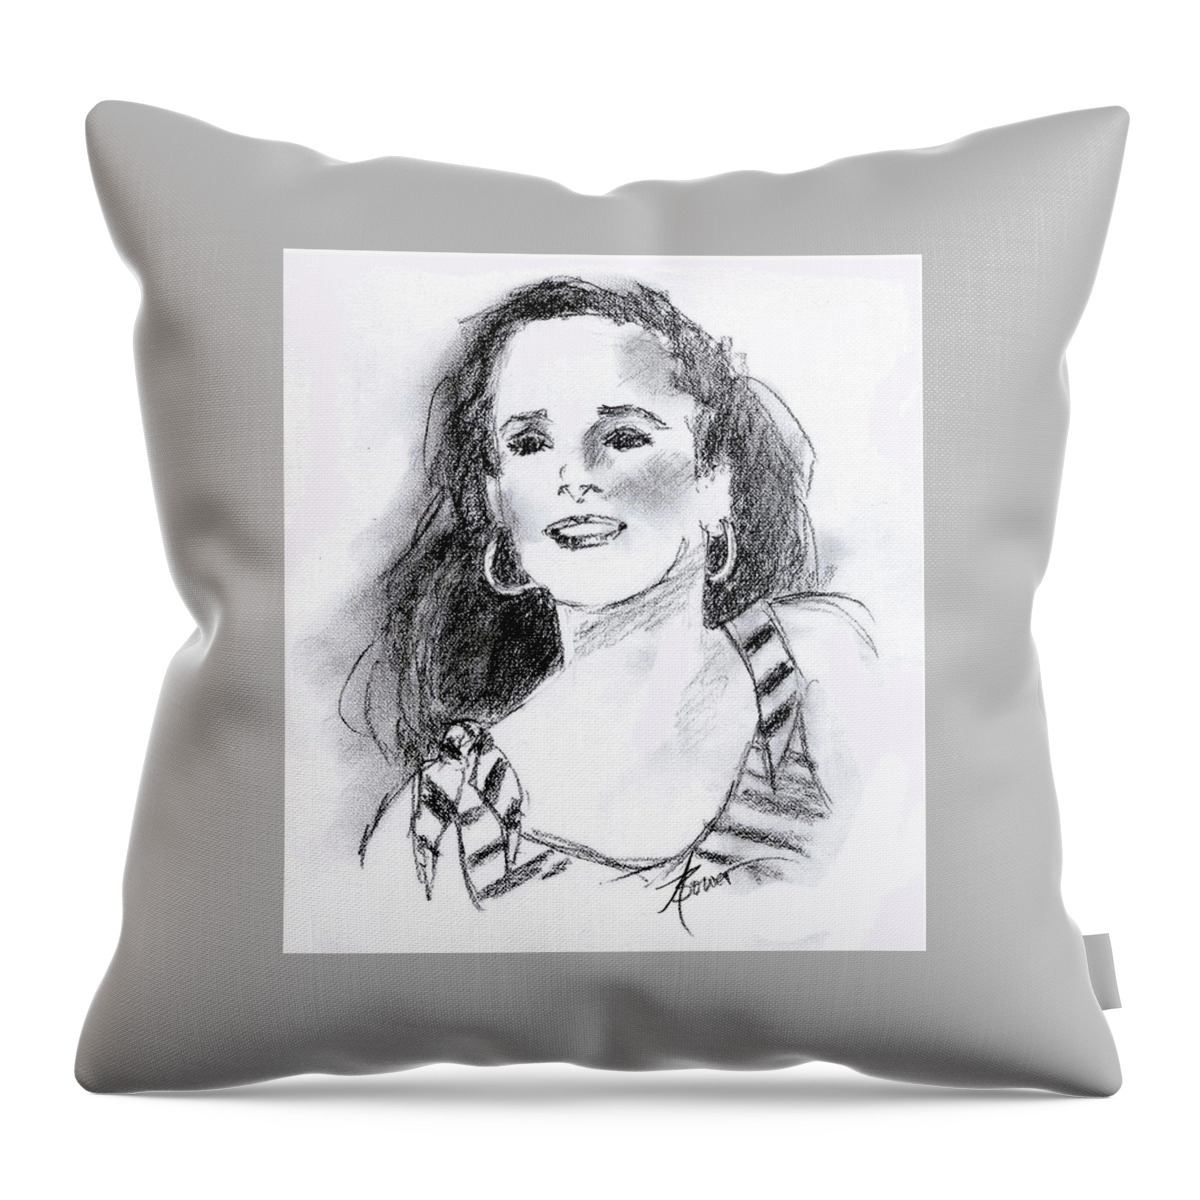 Skektching Throw Pillow featuring the painting Karen by Adele Bower